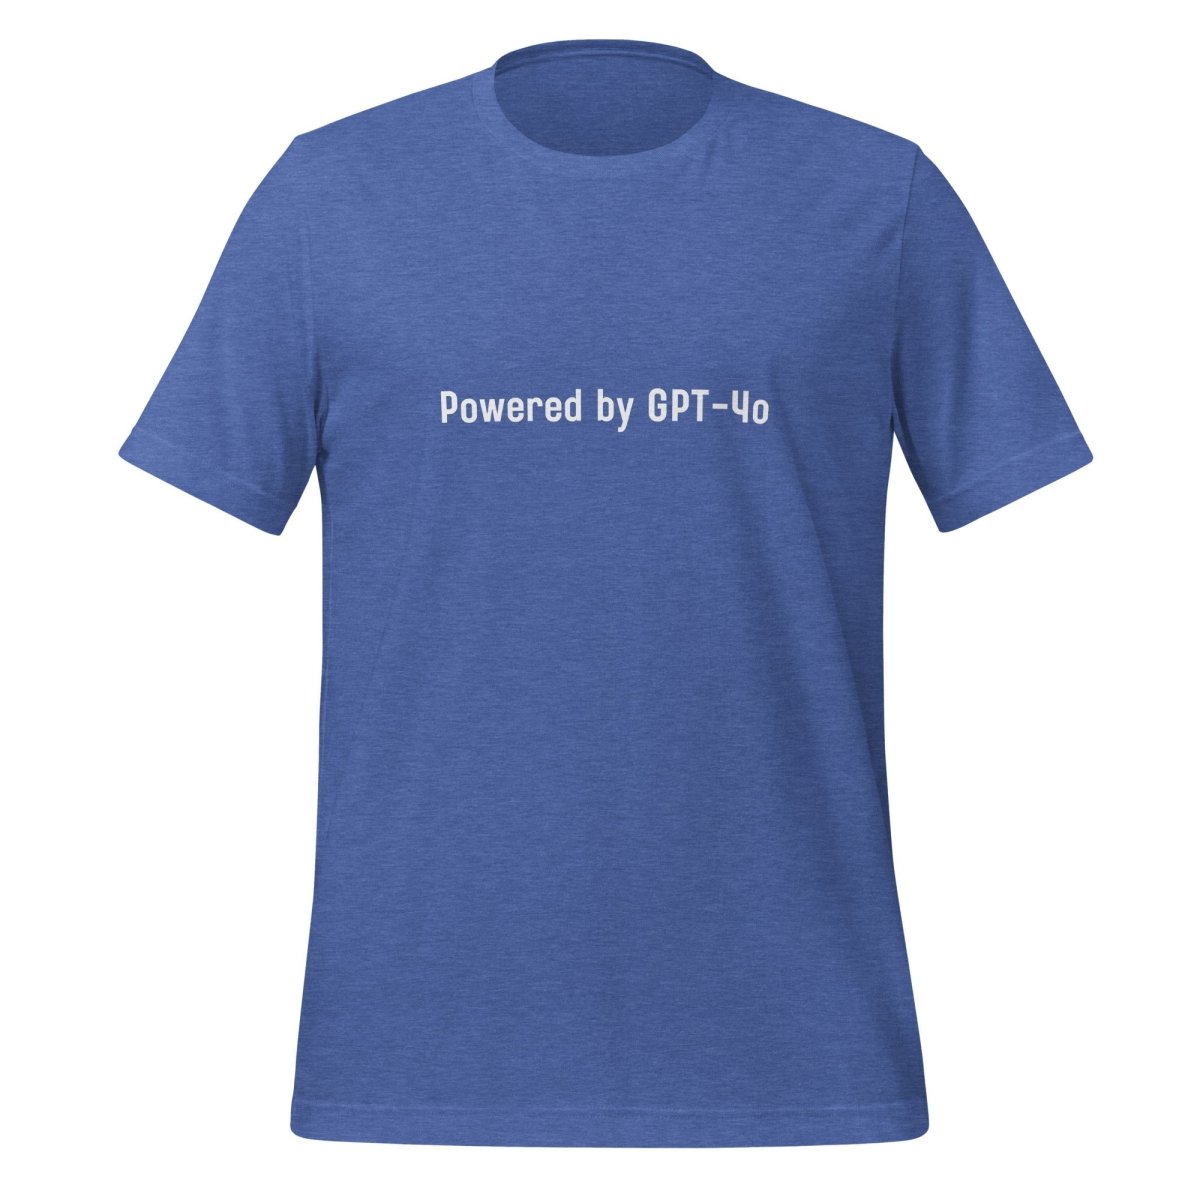 Powered by GPT - 4o T - Shirt 3 (unisex) - Heather True Royal - AI Store